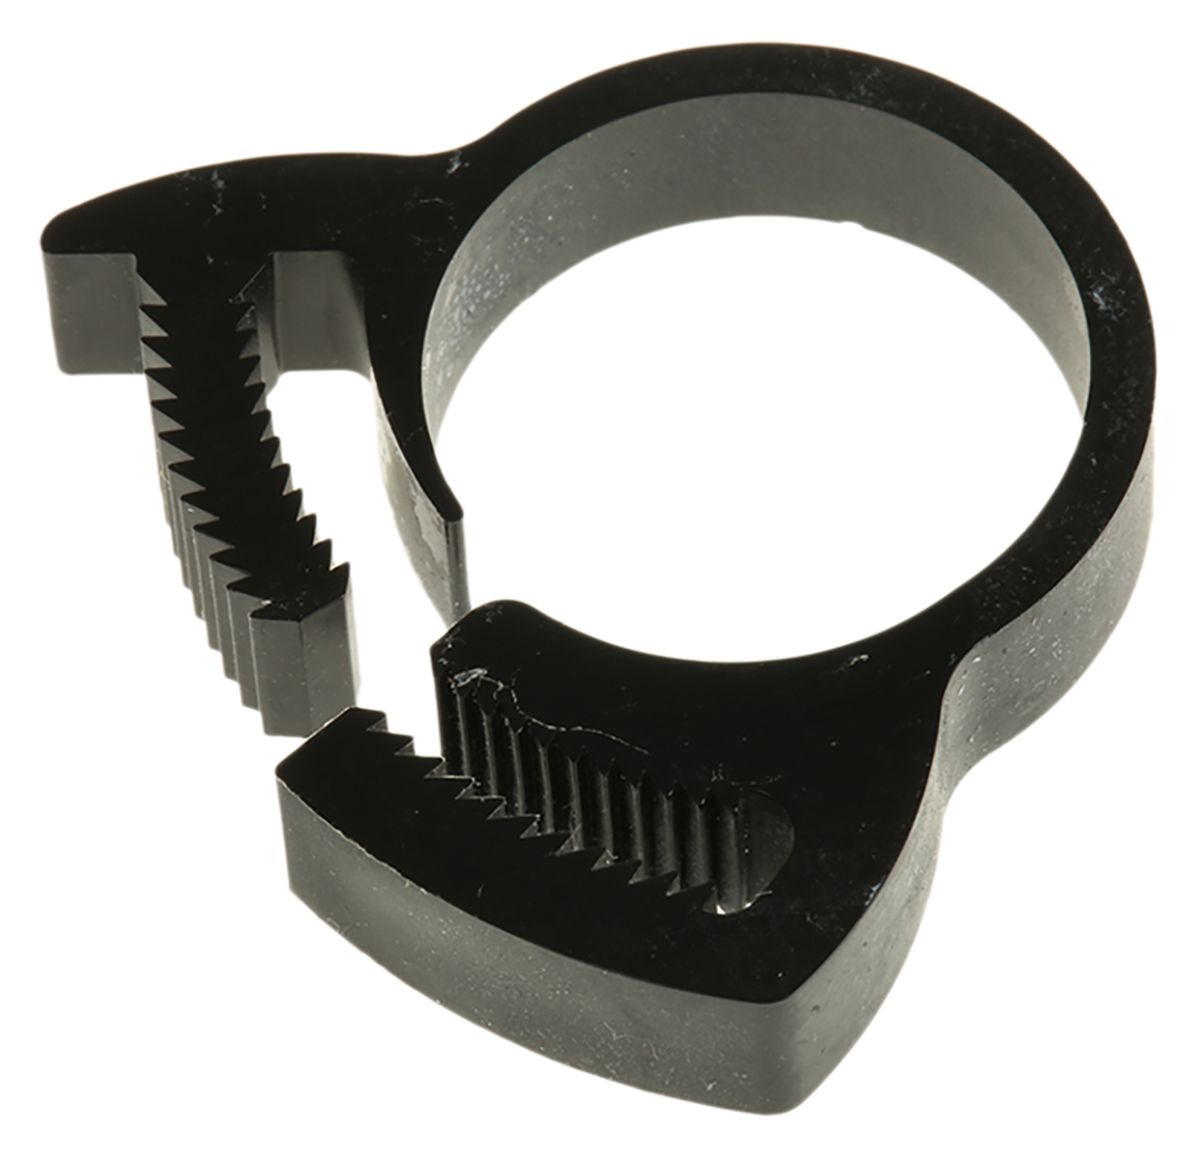 RS PRO Nylon Snap Grip Hose Clamp, 6.9mm Band Width, 16.9 → 19.9mm ID